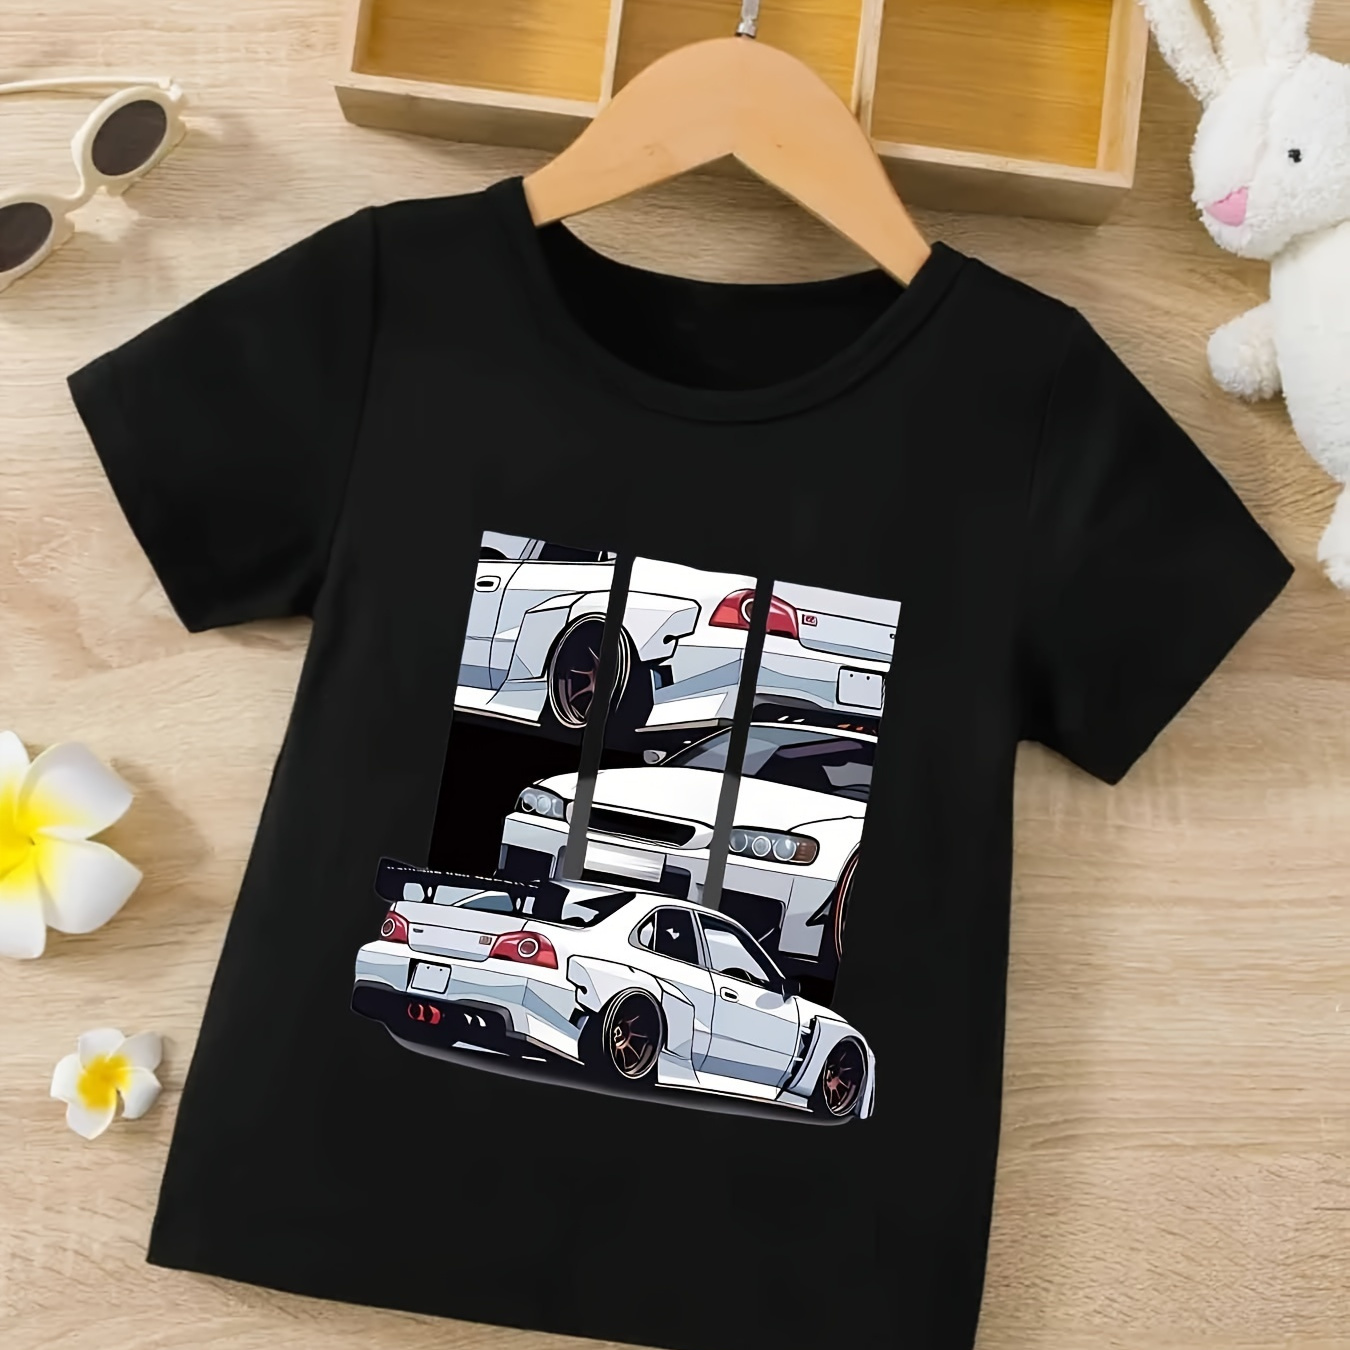 

Race Car Graphic Short Sleeve Crew Neck T-shirt, Casual Tee Tops Summer Gift, Boys' Clothing